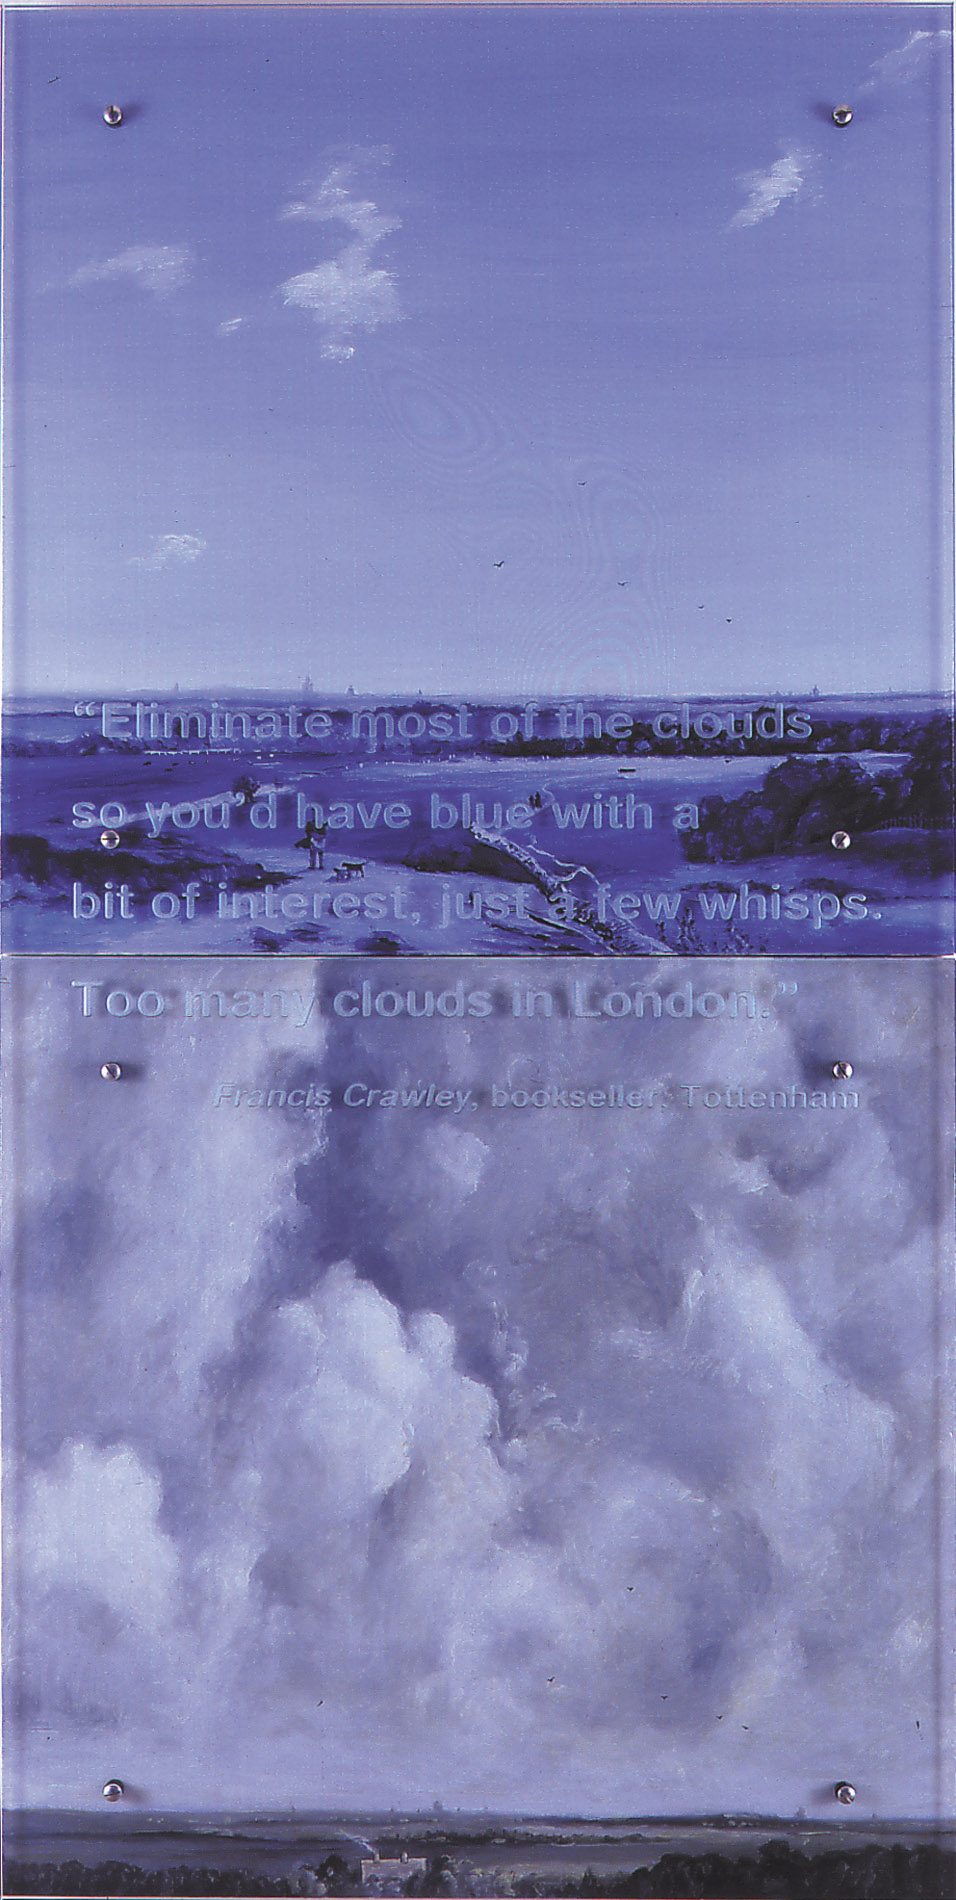 Blue with a little bit of interest, 2000 30" x 60" (76.5cm x 153cm) diptych, oil/wood, sandblasted glass, bolts After Andreas Schelfhout, Landscape Near Haarlem, V&A, London Text: Eliminate most of the clouds, just so you'd have blue with a bit of interest. Just a few wisps. Too many clouds in London.ÑFrancis Crawley, bookseller, Tottenham